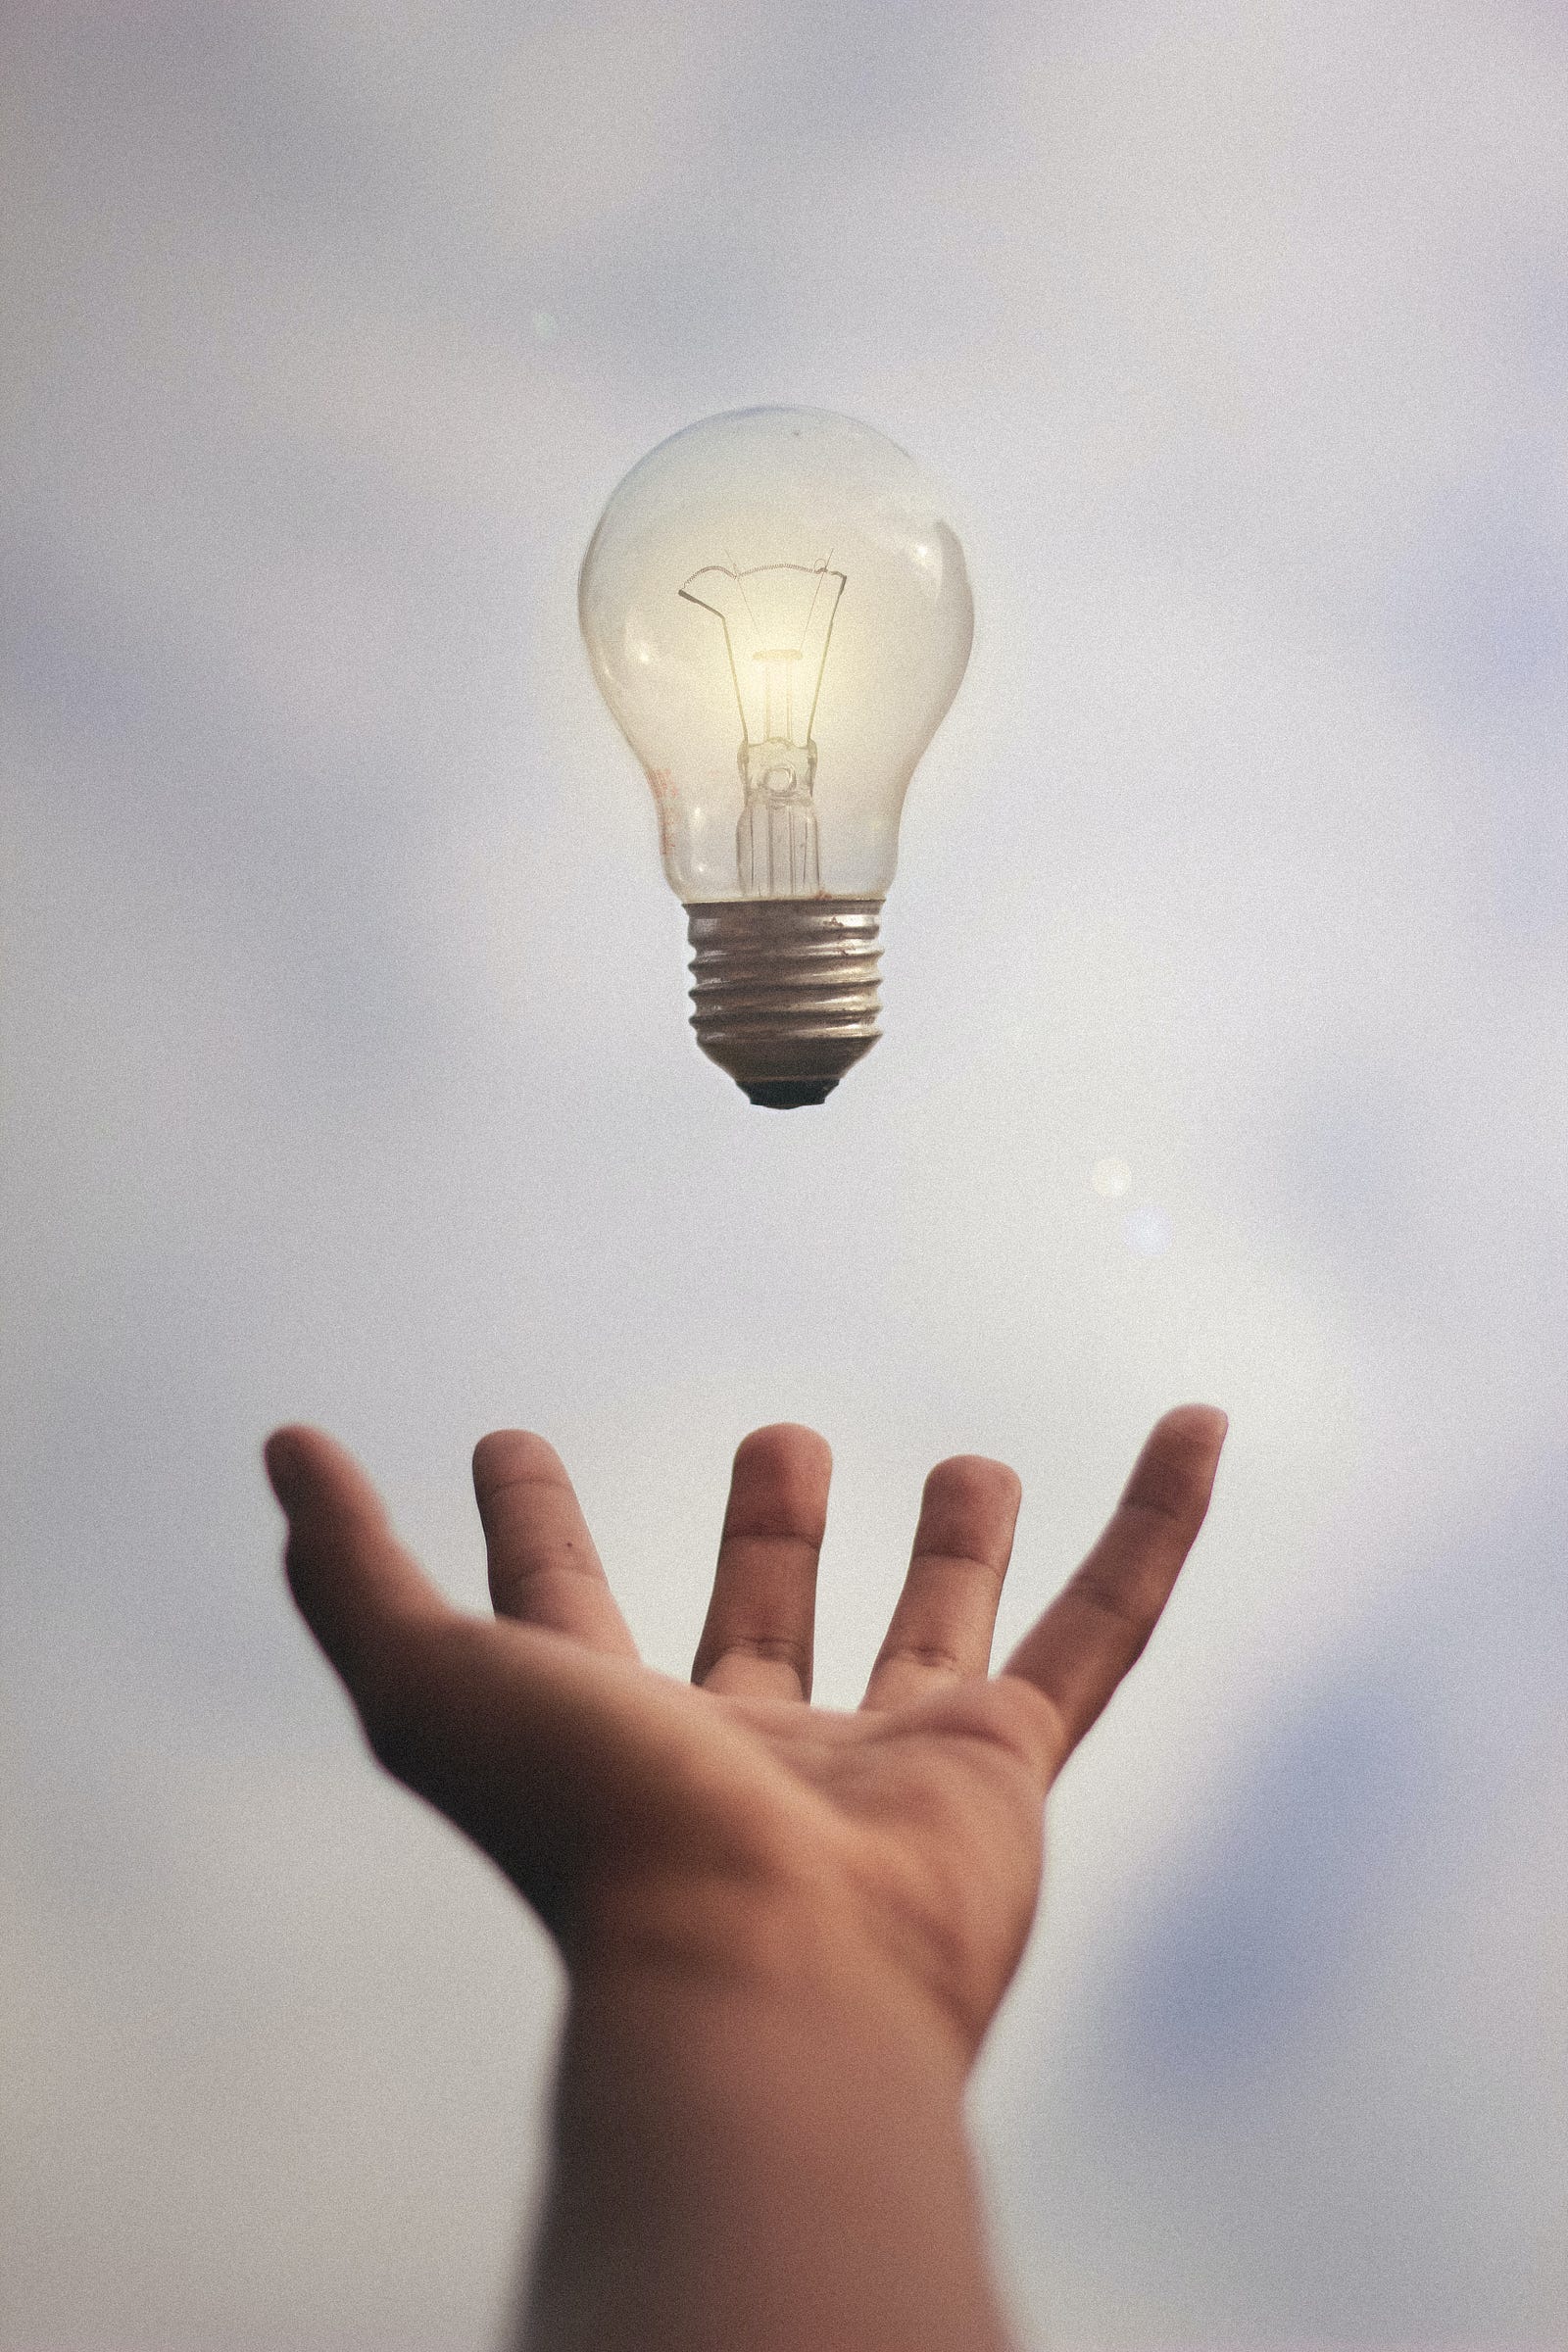 A hand tosses a lightbulb into the air. Lux is a measure of illumination. It varies with the distance to the light source.